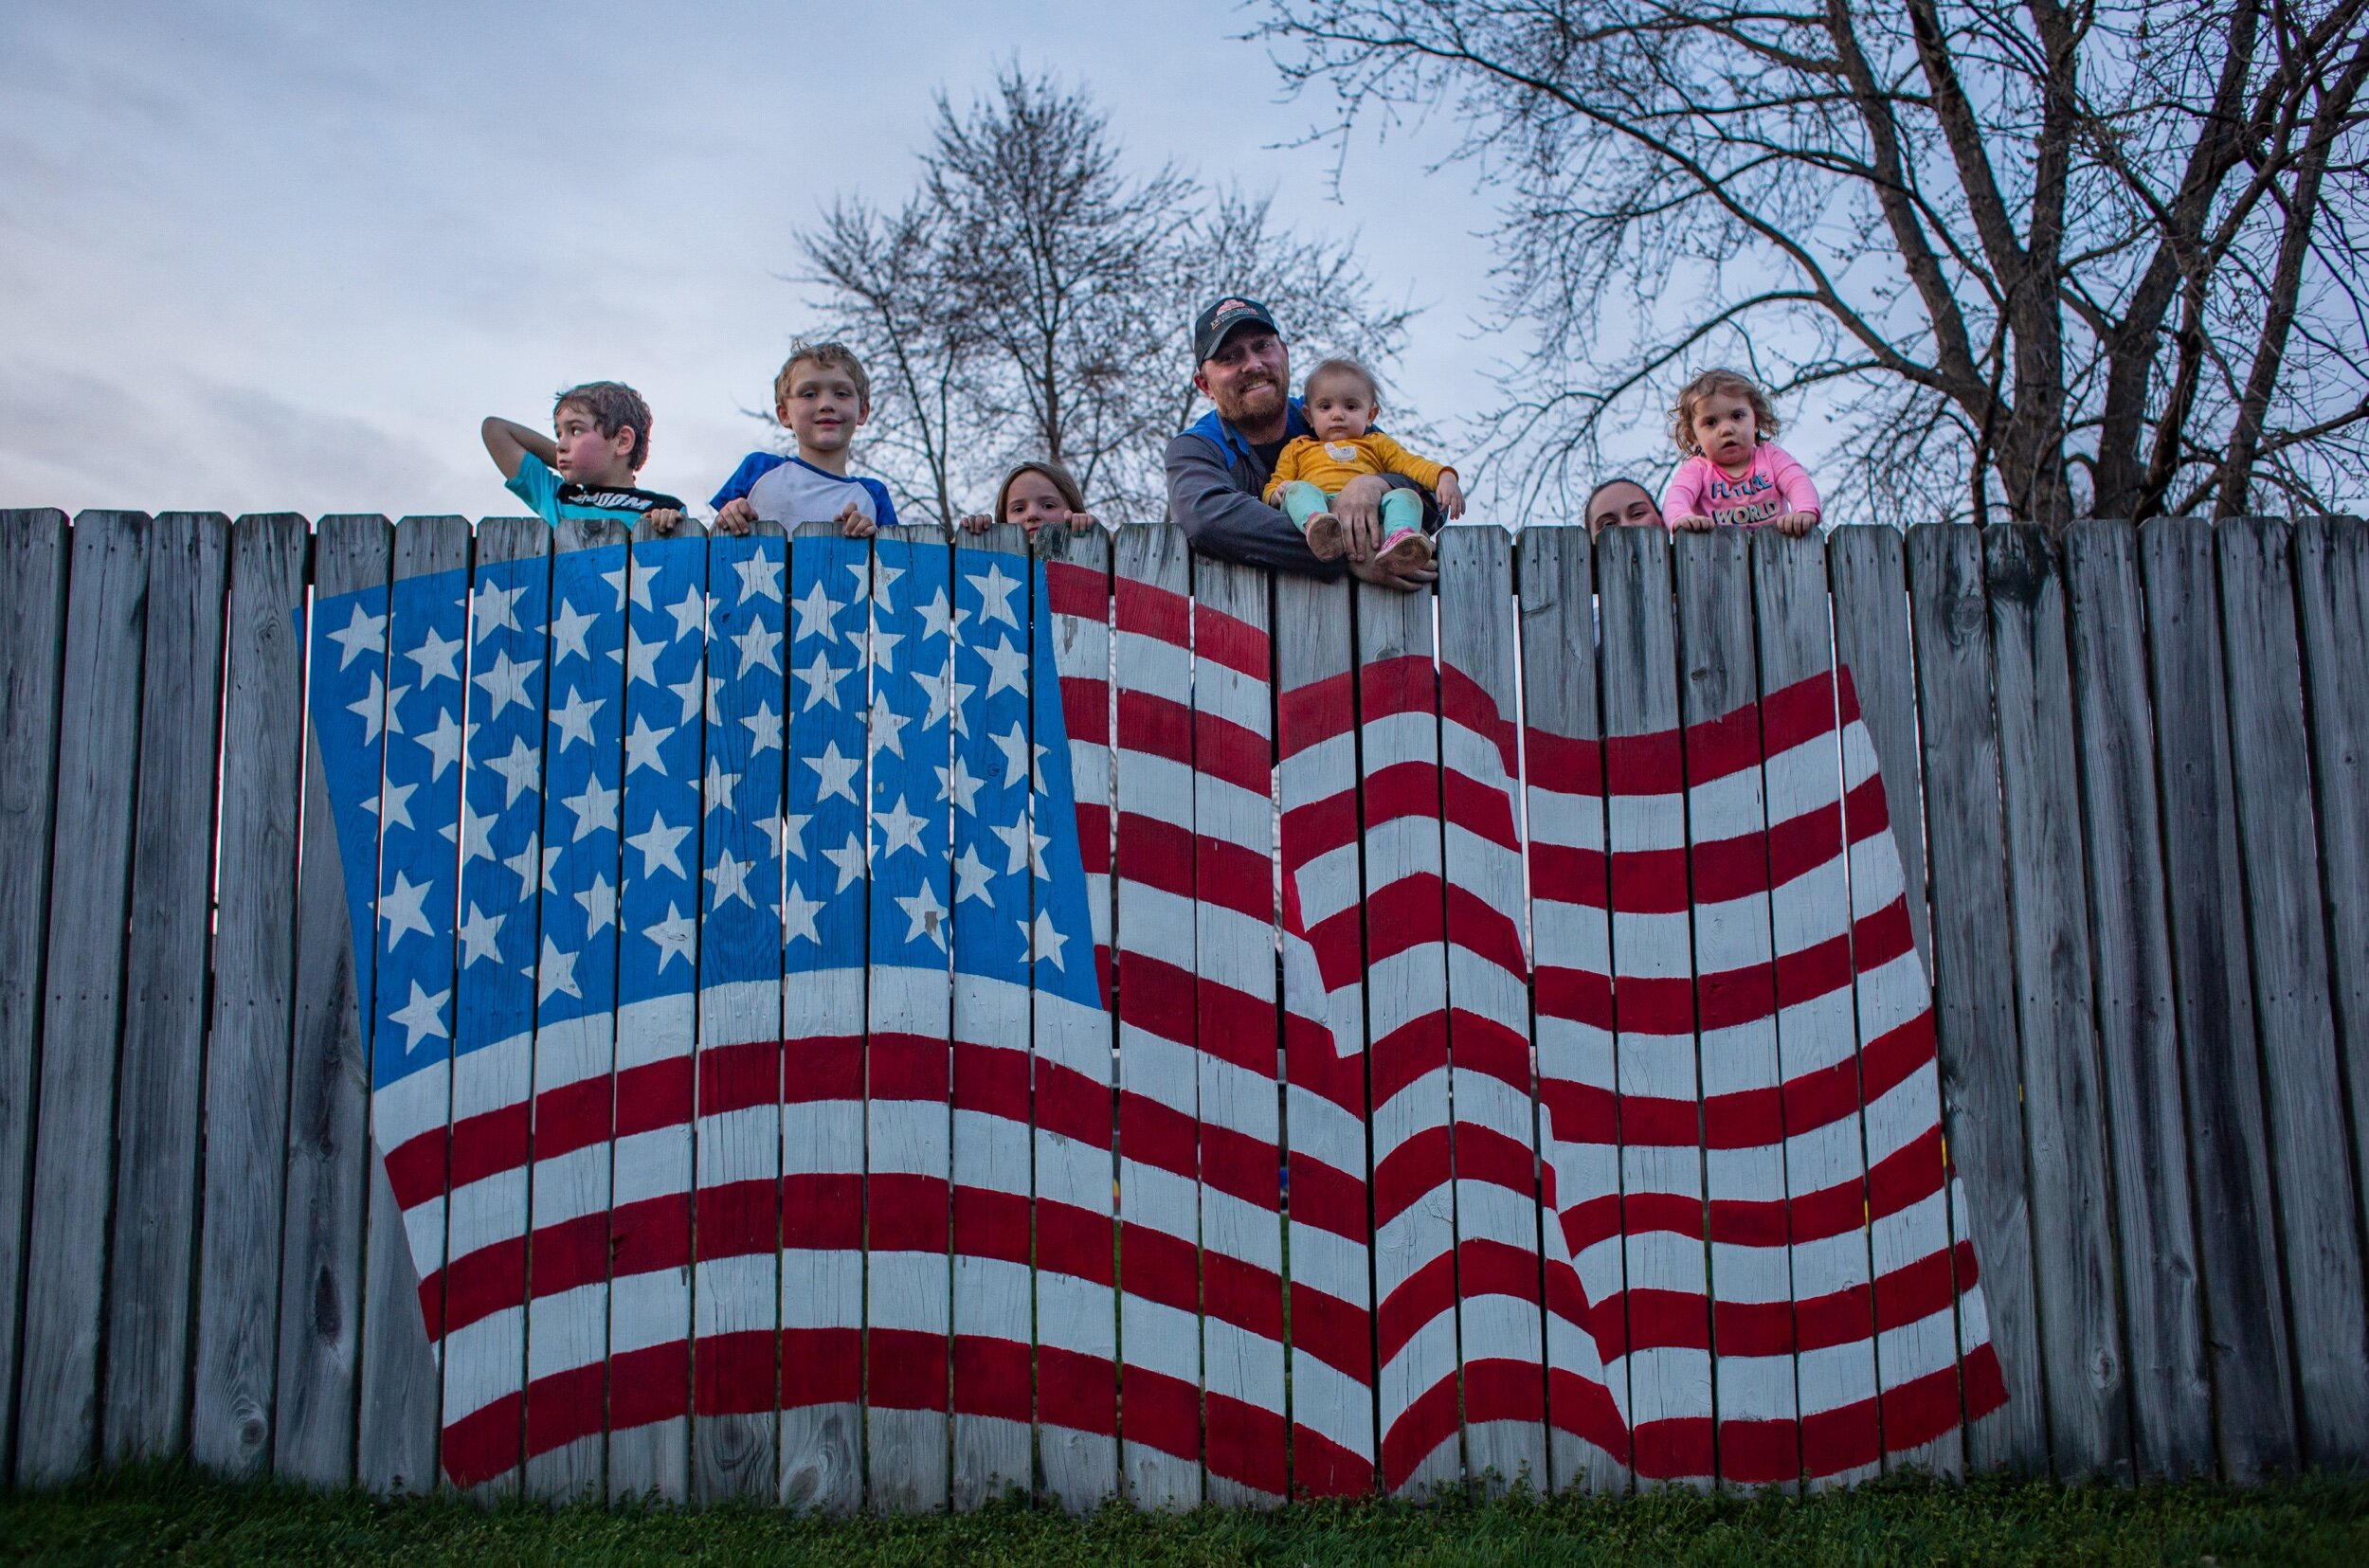  The Ellis family of Holland, Rayland, 6, Torrin, 8, Reagan, 4, Joseph, Everlee, 1, Jennifer and Tinsley, 2, pose for a portrait over their fence on March, 26, 2020. Jennifer had the American flag mural painted for her husband, Joseph, during his 201